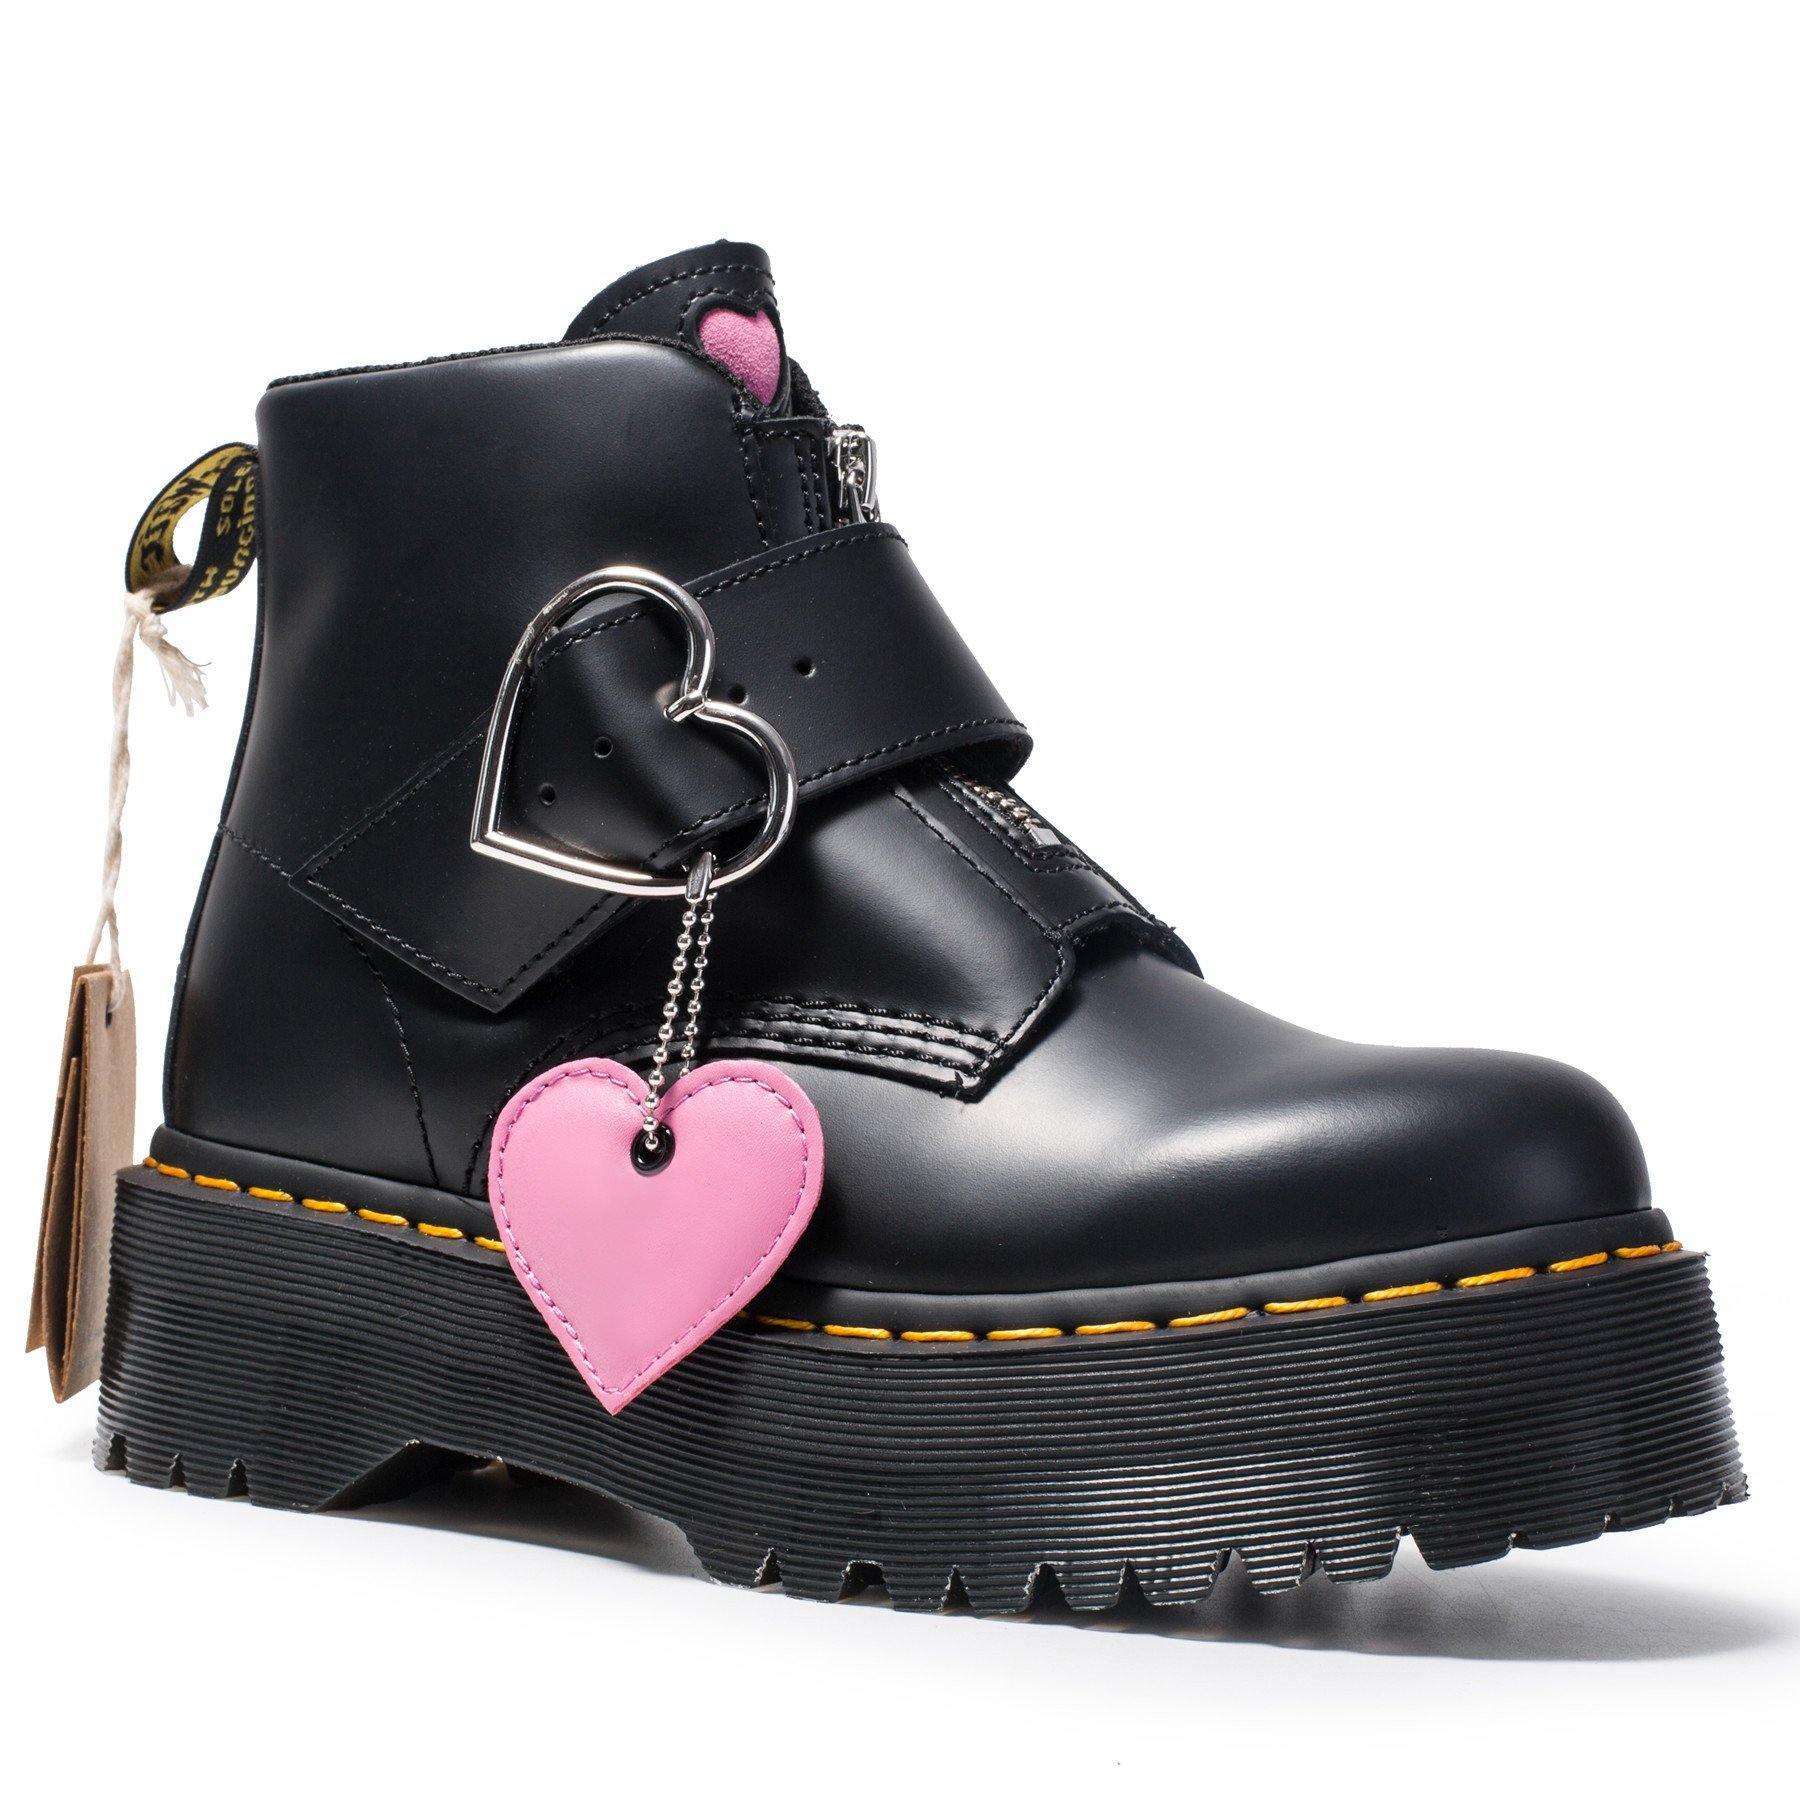 Peach Heart Fashion Boots - ForVanity boots, women's shoes Shoes